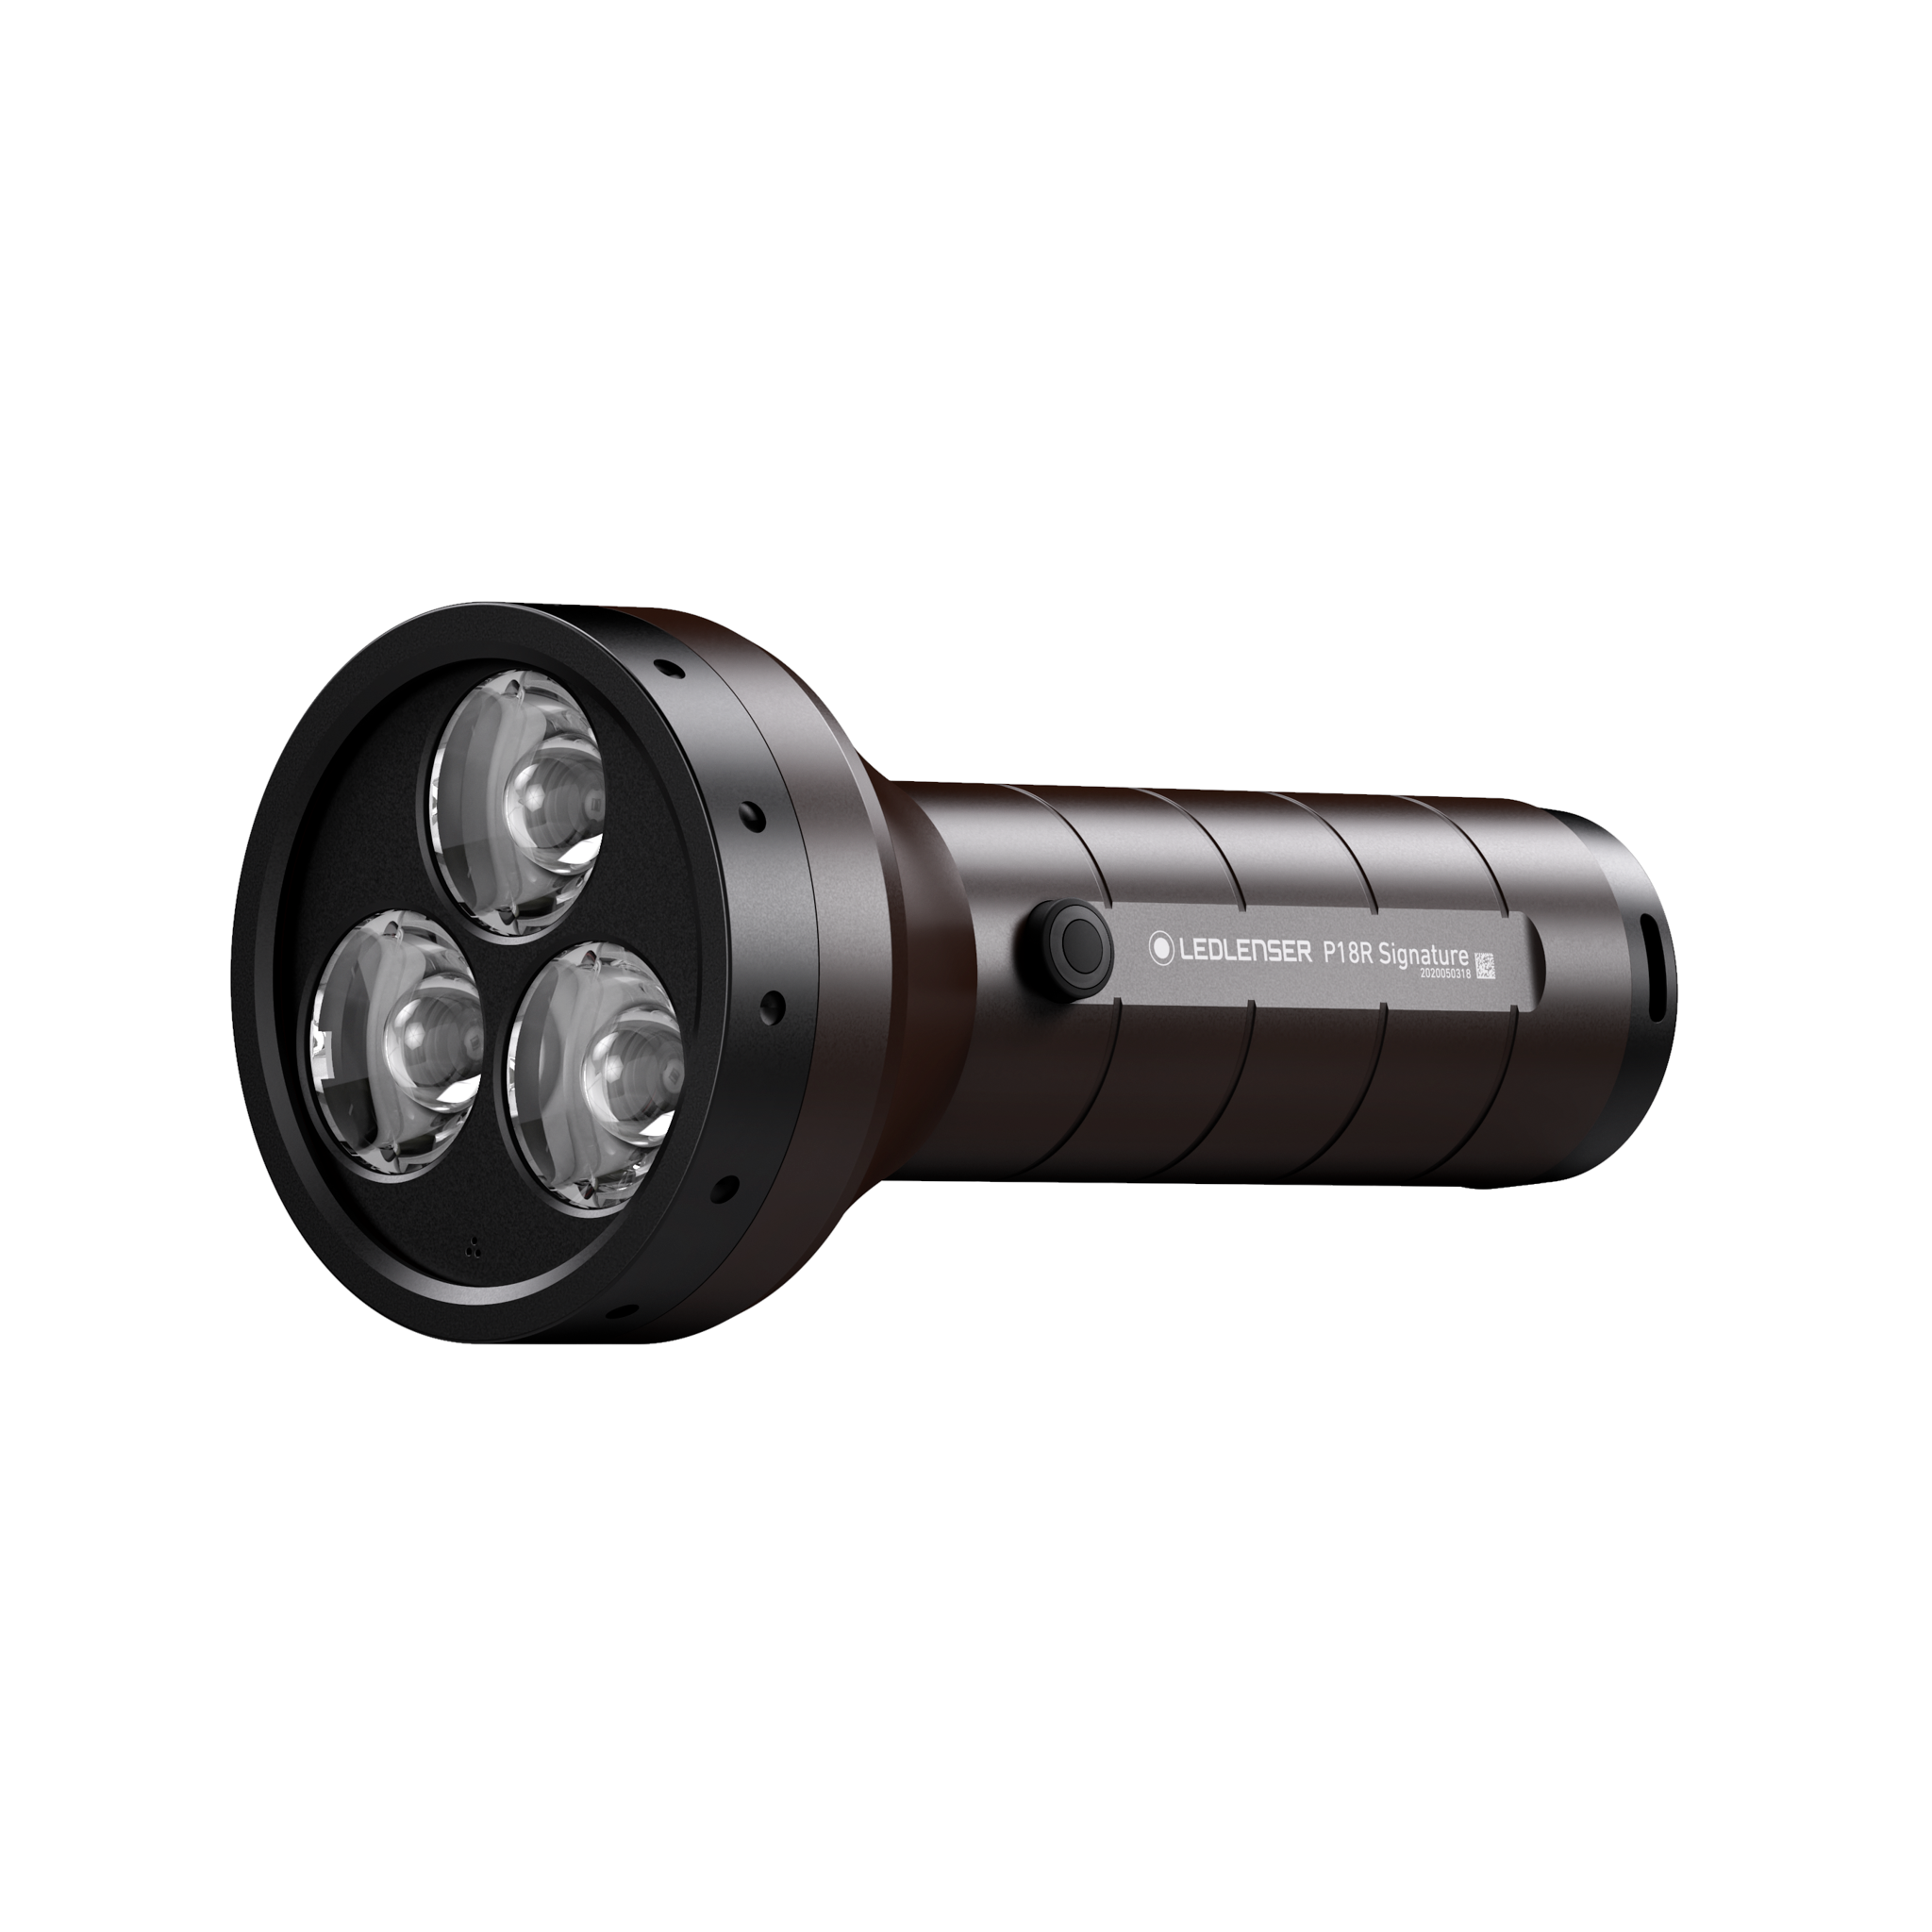 P18R Signature Rechargeable Torch